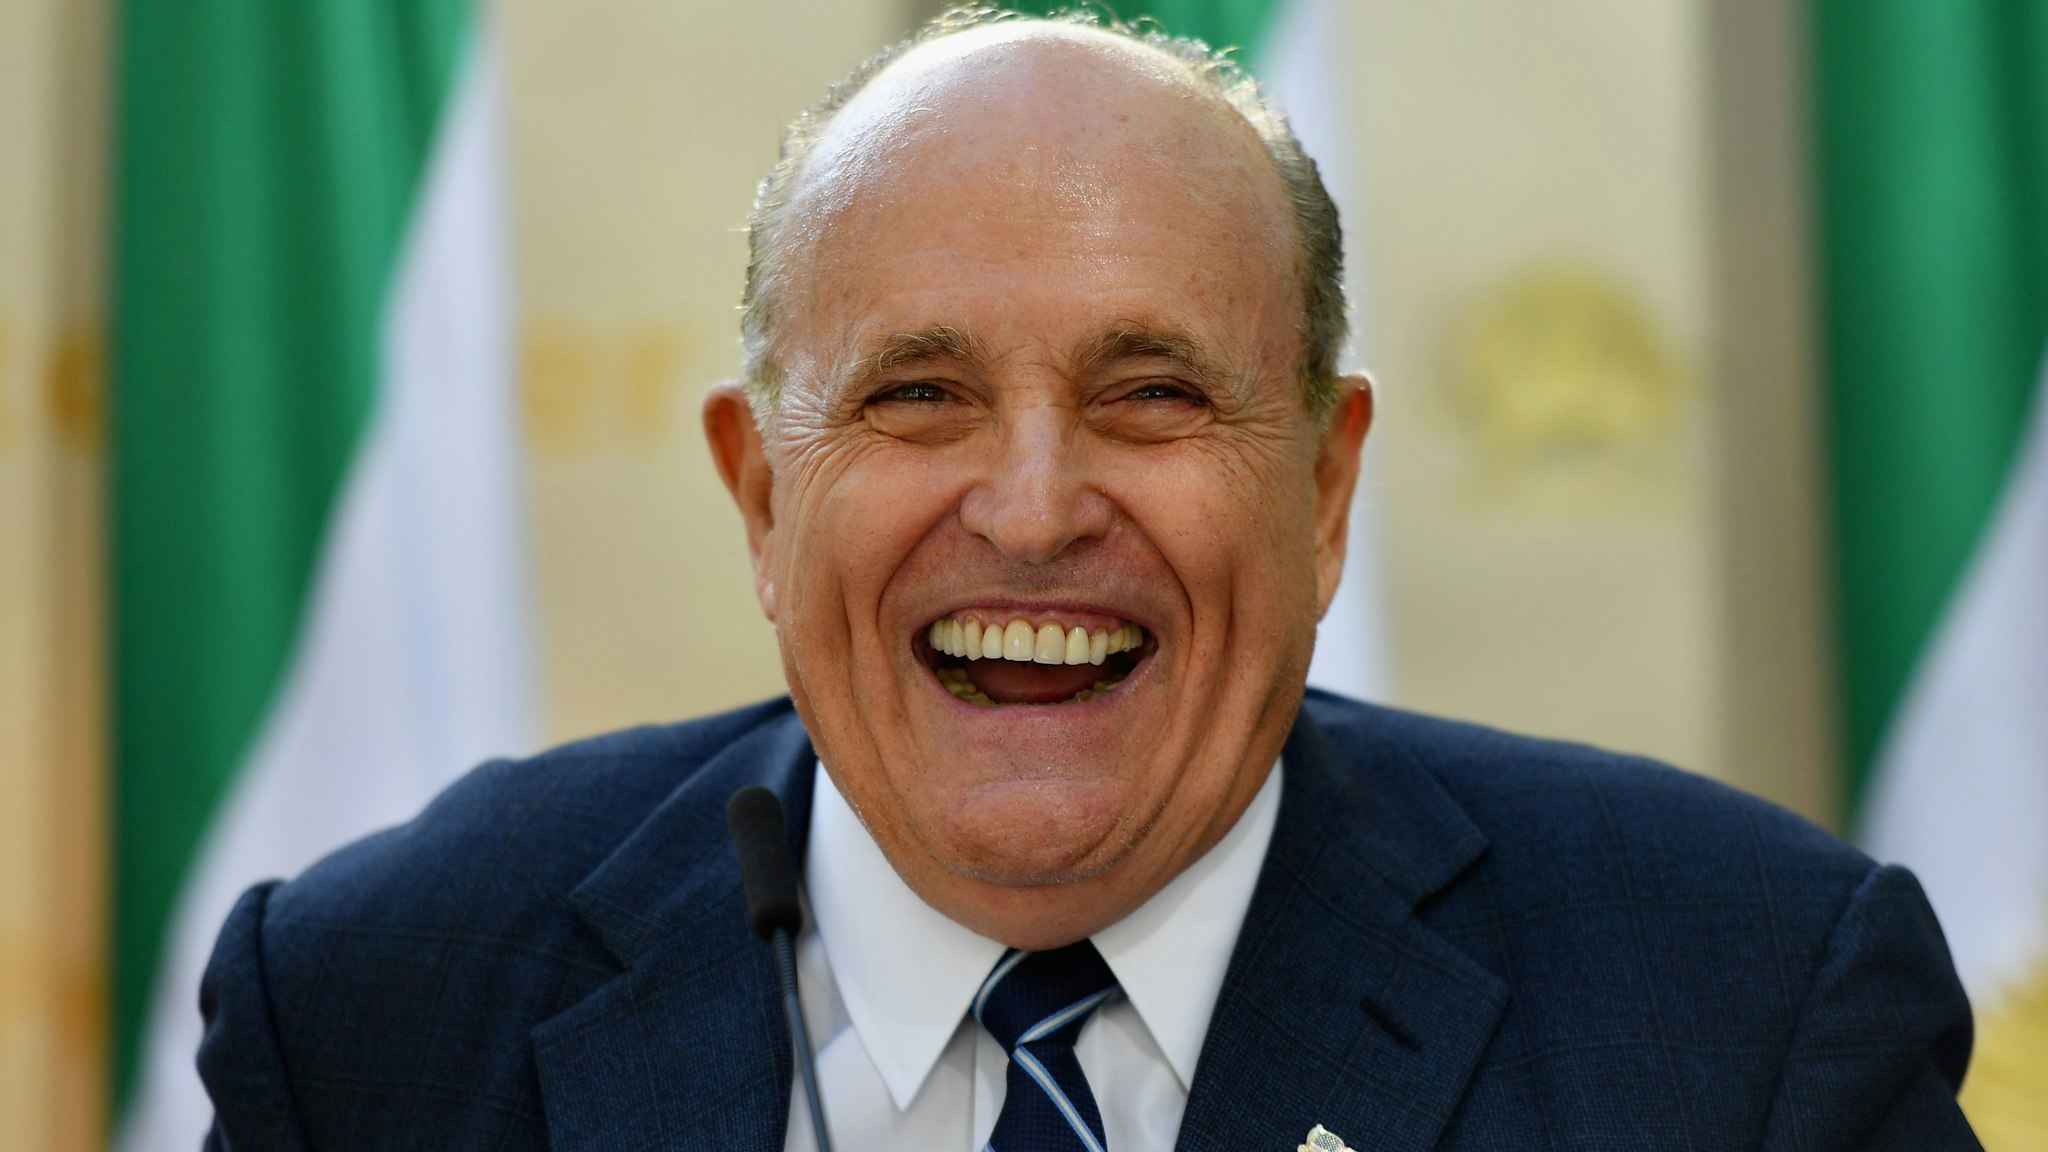 Rudy Giuliani, Former Mayor of New York City speaks to the Organization of Iranian American Communities during their march to urge "recognition of the Iranian people's right for regime change," outside the United Nations Headquarters in New York on September 24, 2019.